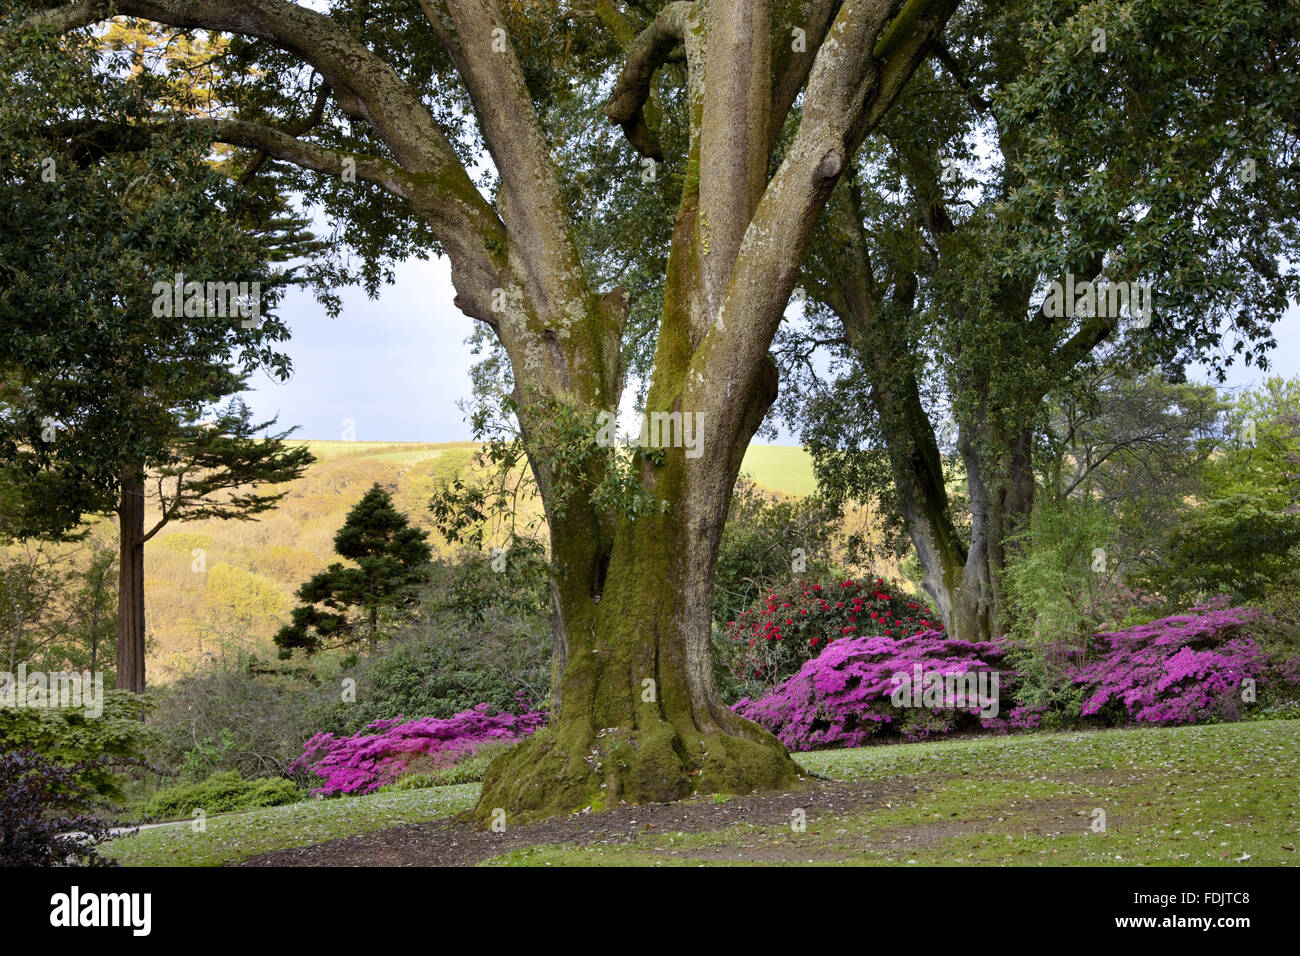 Rhododendrons and azaleas at Trelissick Garden, Cornwall, in May. Stock Photo